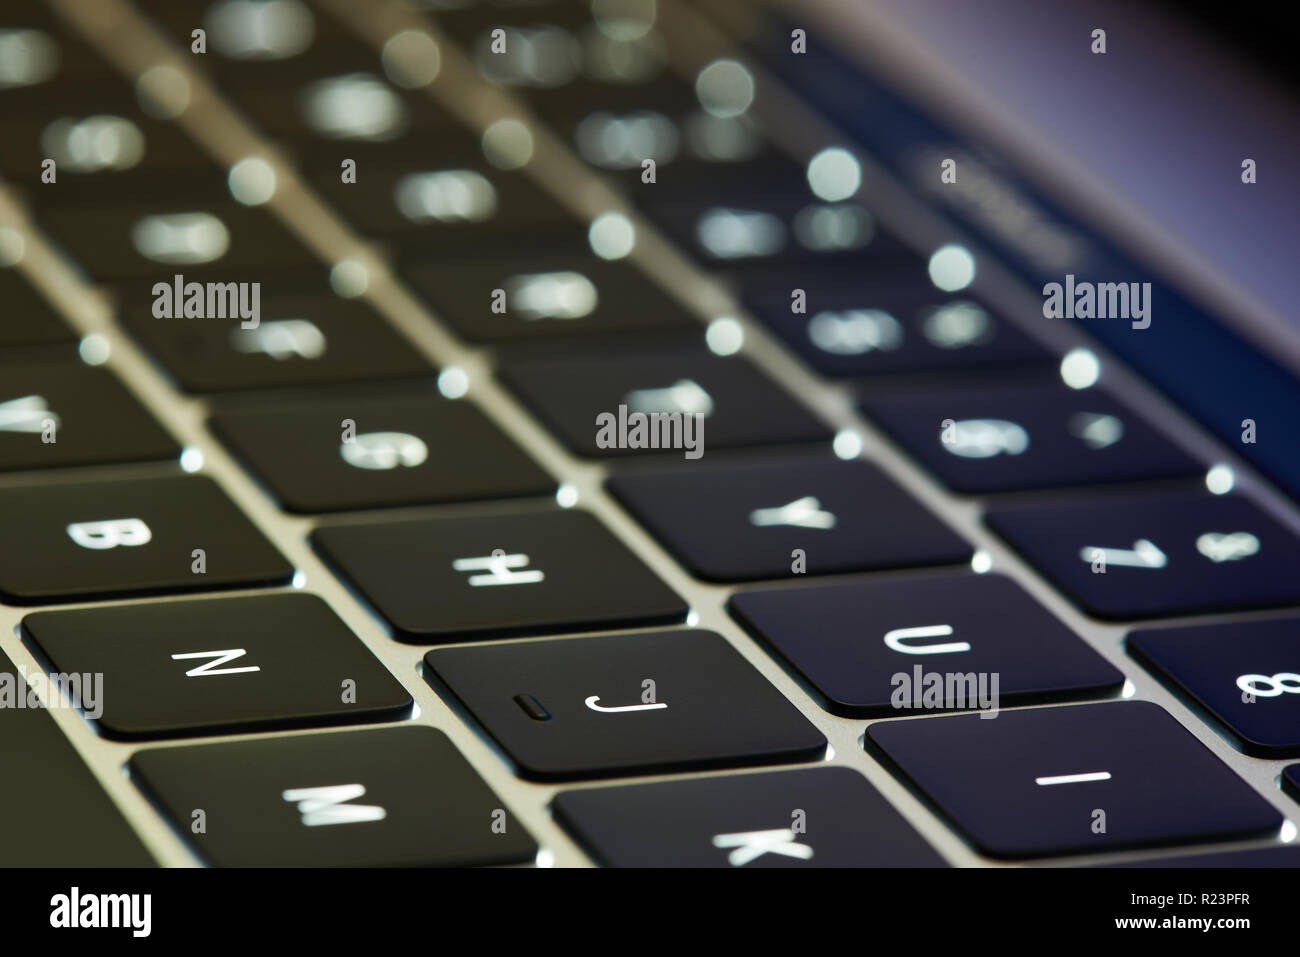 Laptop keyboard close up view. Computer buttons with back light Stock Photo